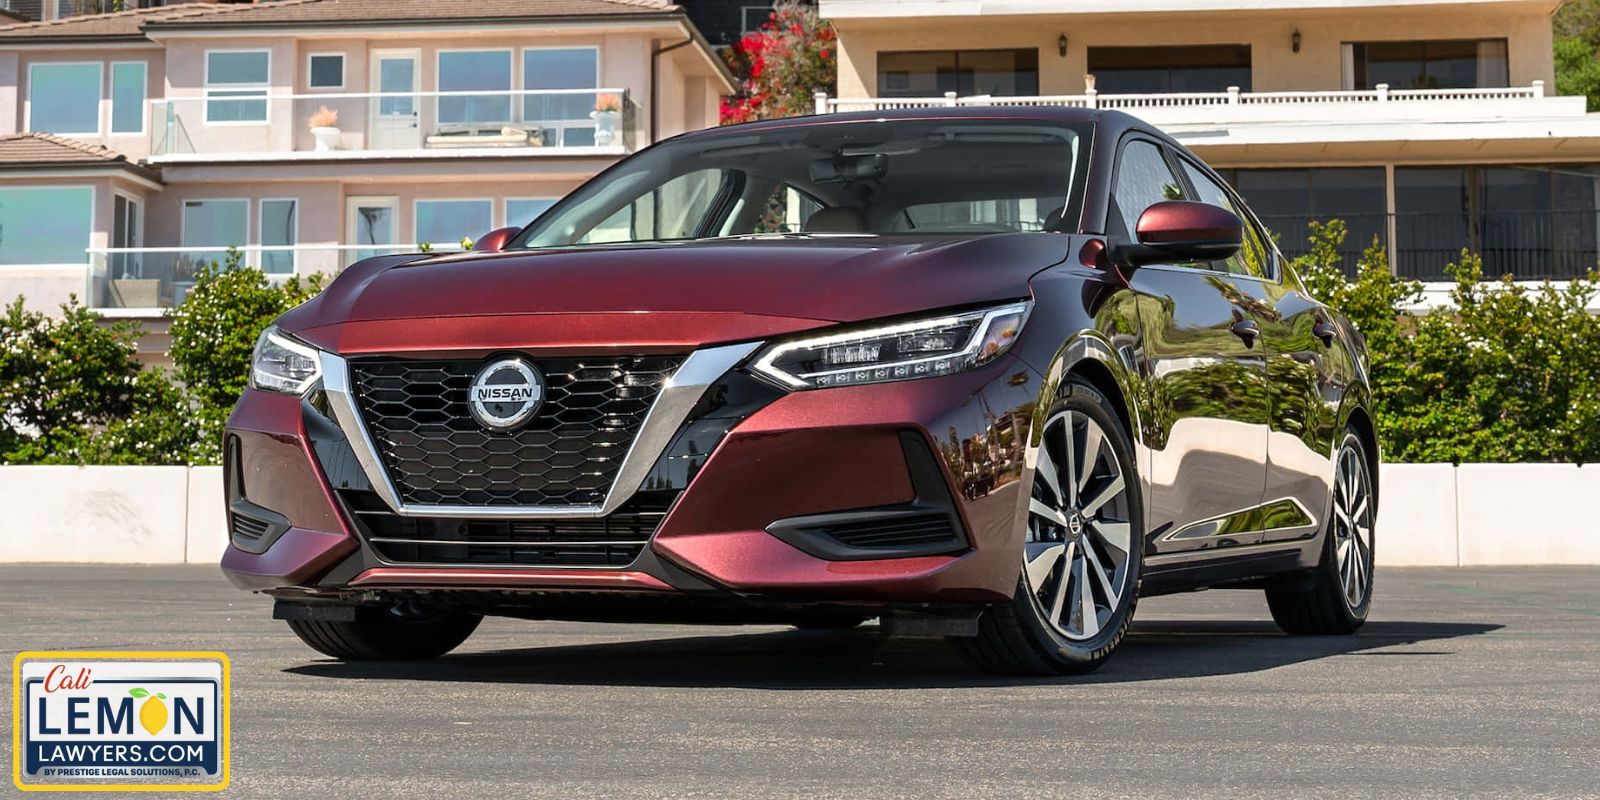 From 2018 to 2023 Nissan released a range of Sentra models